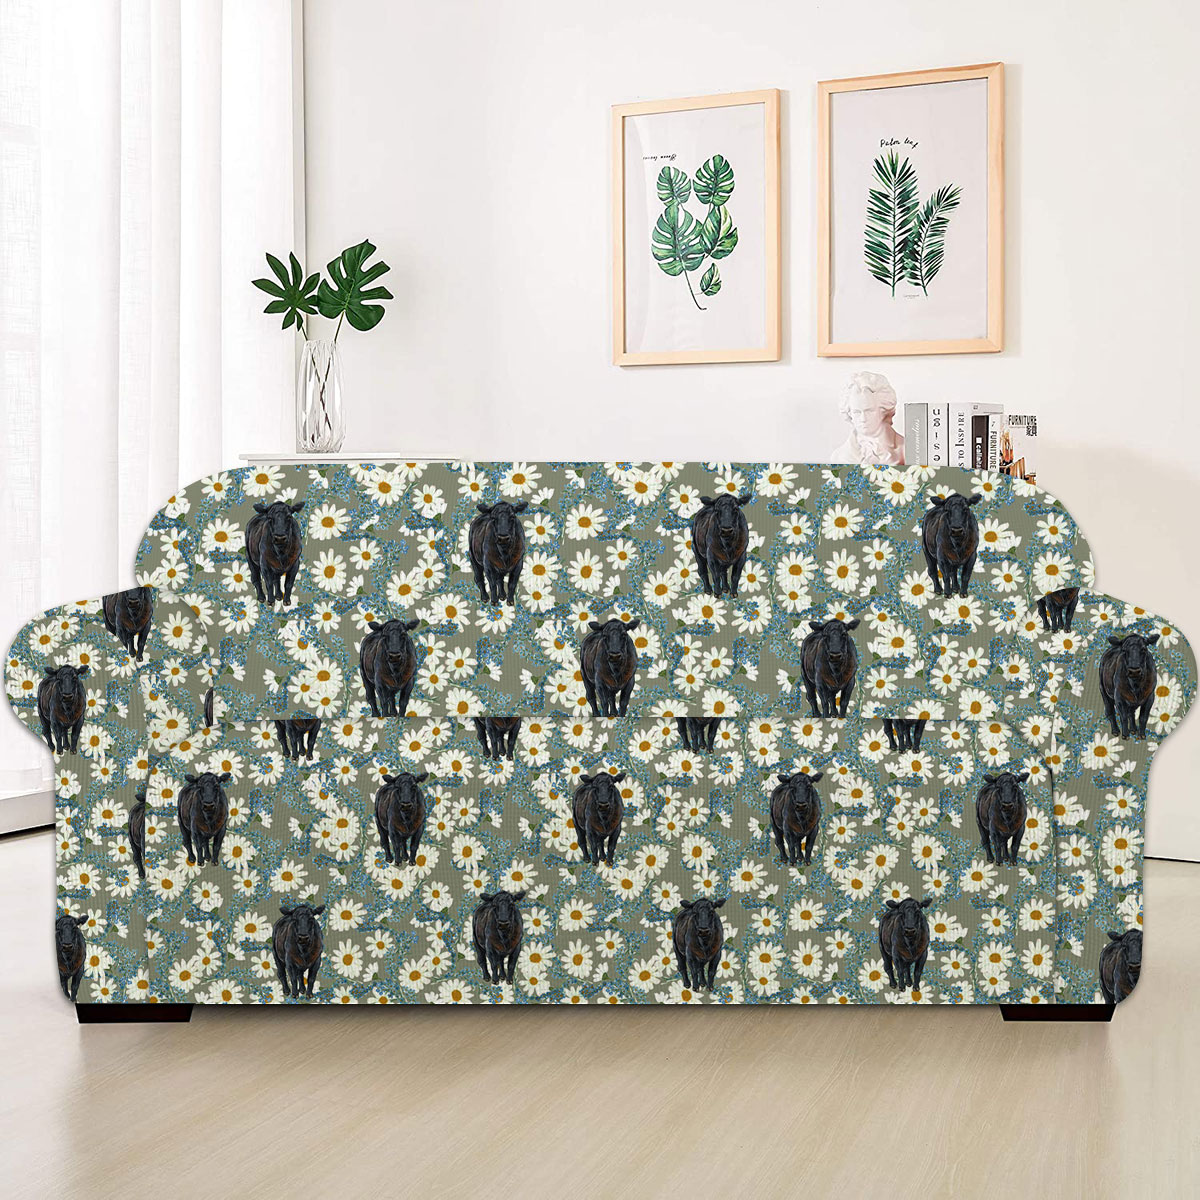 Black Angus Camomilles Flower Grey Pattern Sofa Cover